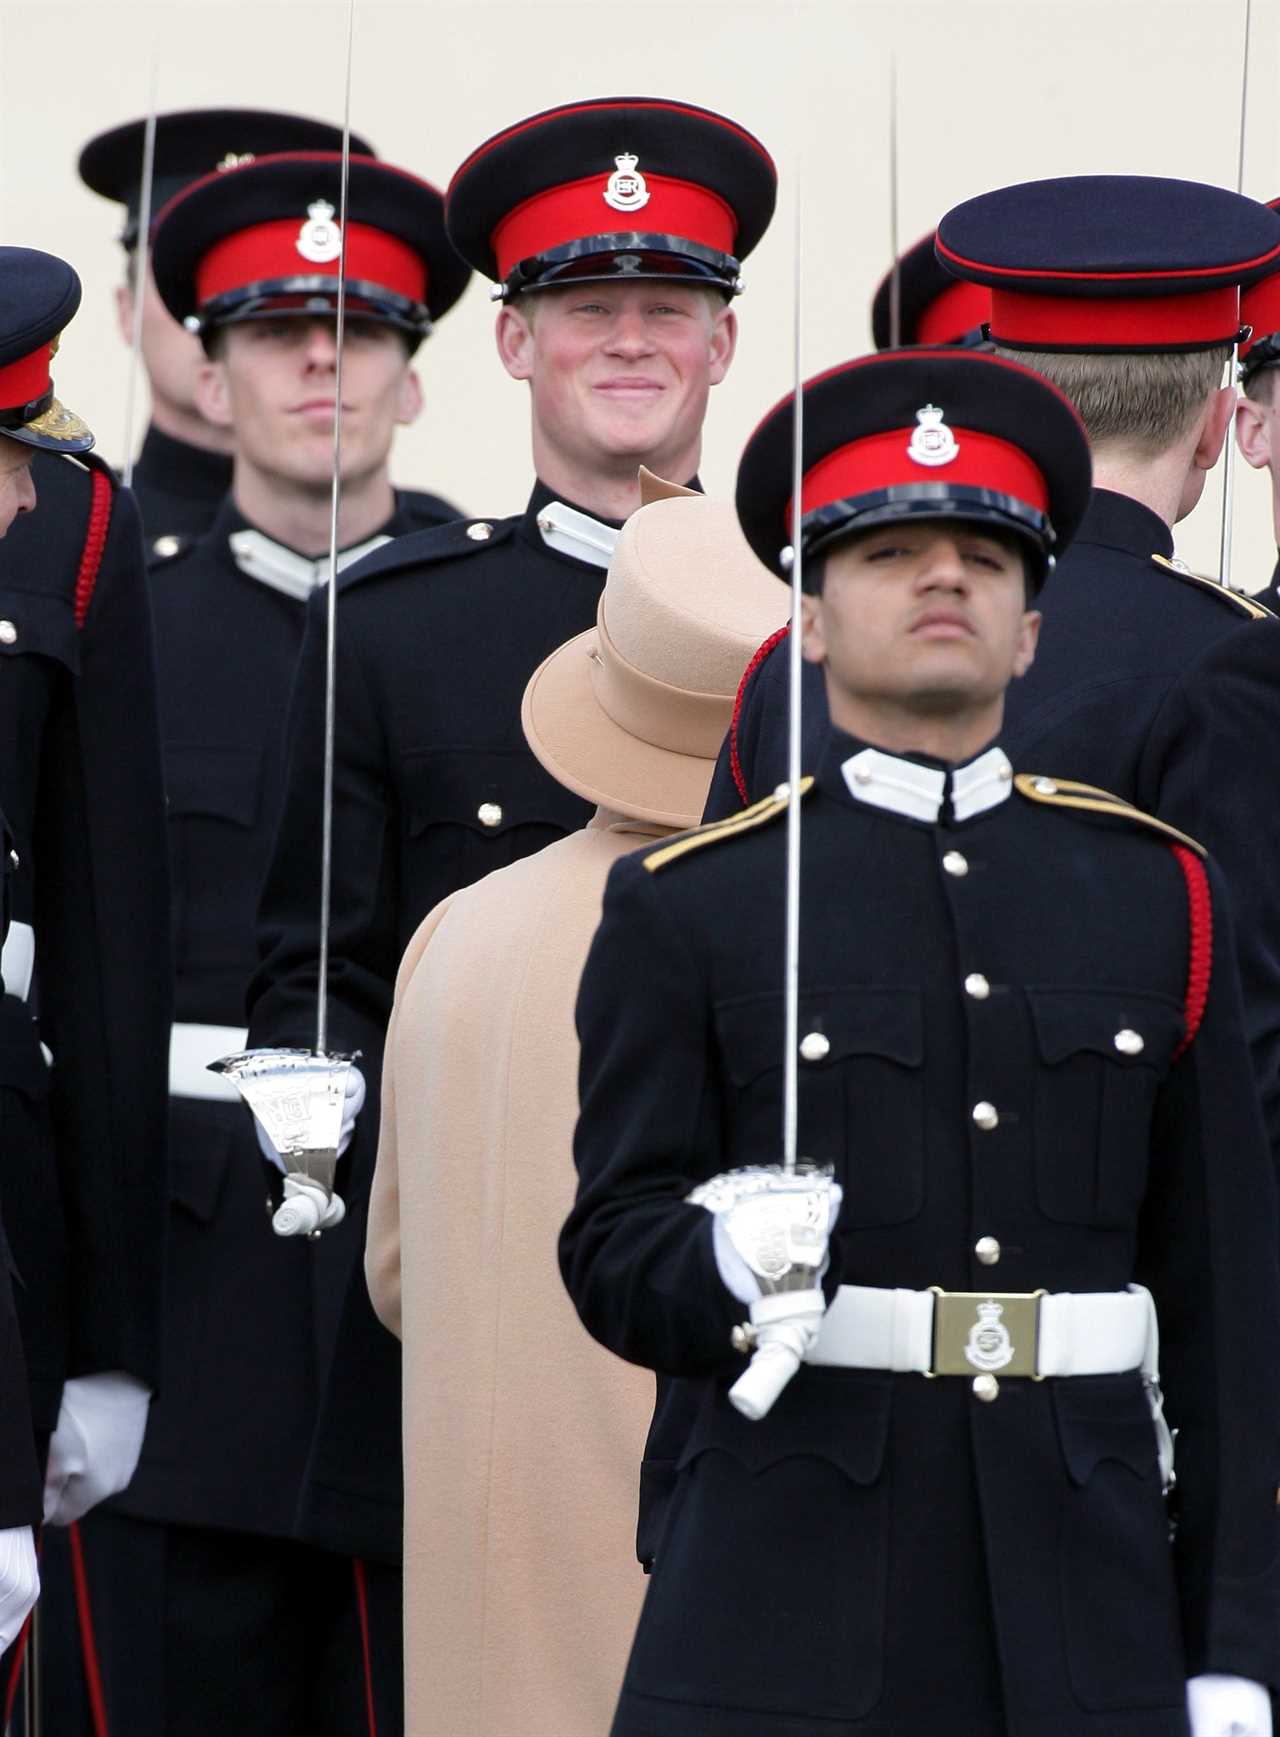 Prince Harry insists he thought the ‘P-word’ was ‘harmless’ when he used it to describe a Pakistani soldier in 2006